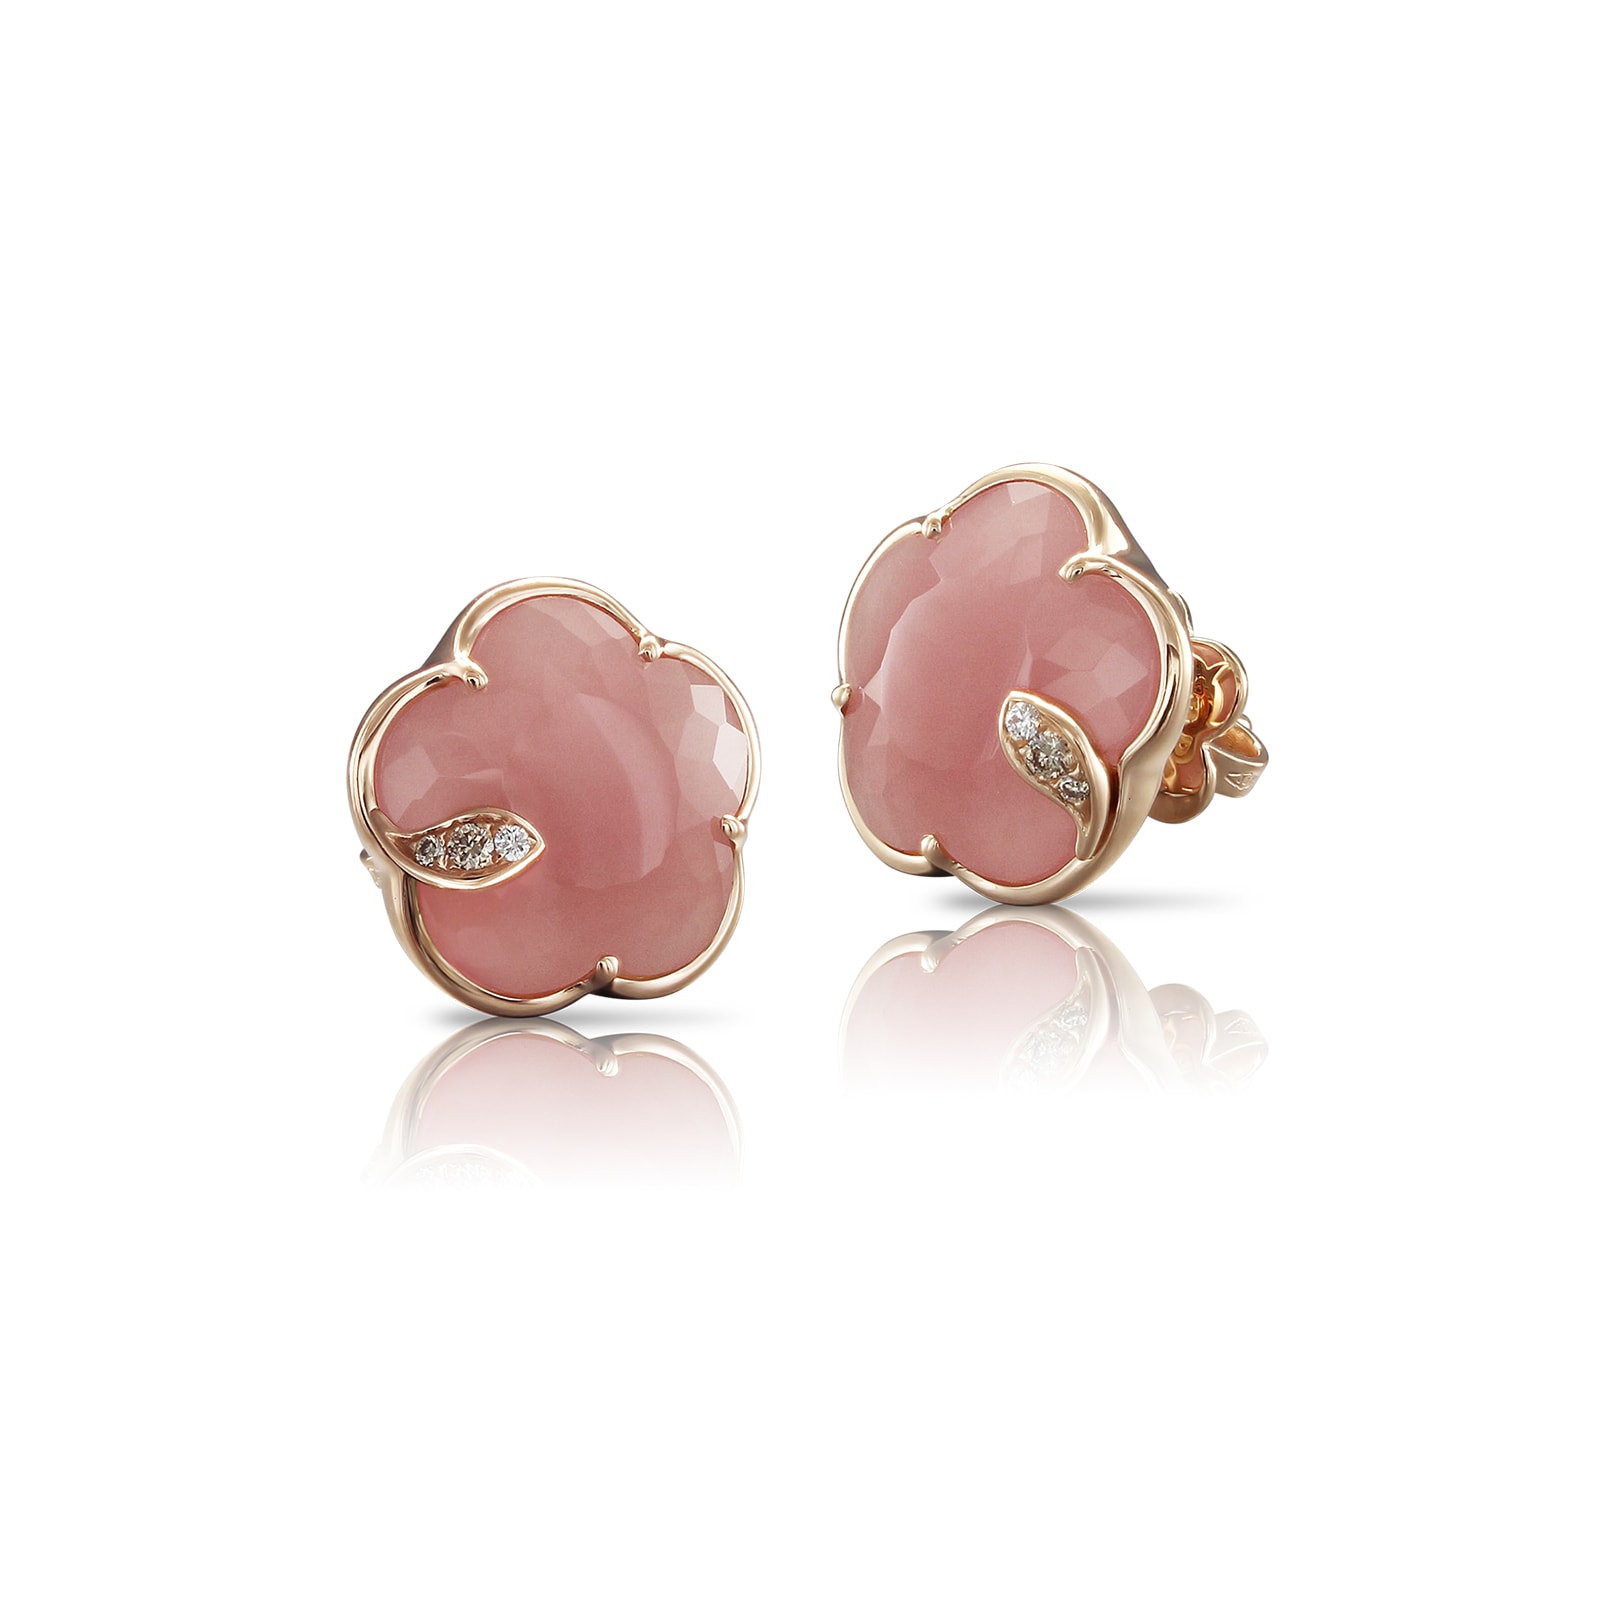 Petit Joli Earrings in 18ct Rose Gold with Pink Chalcedony and Diamonds